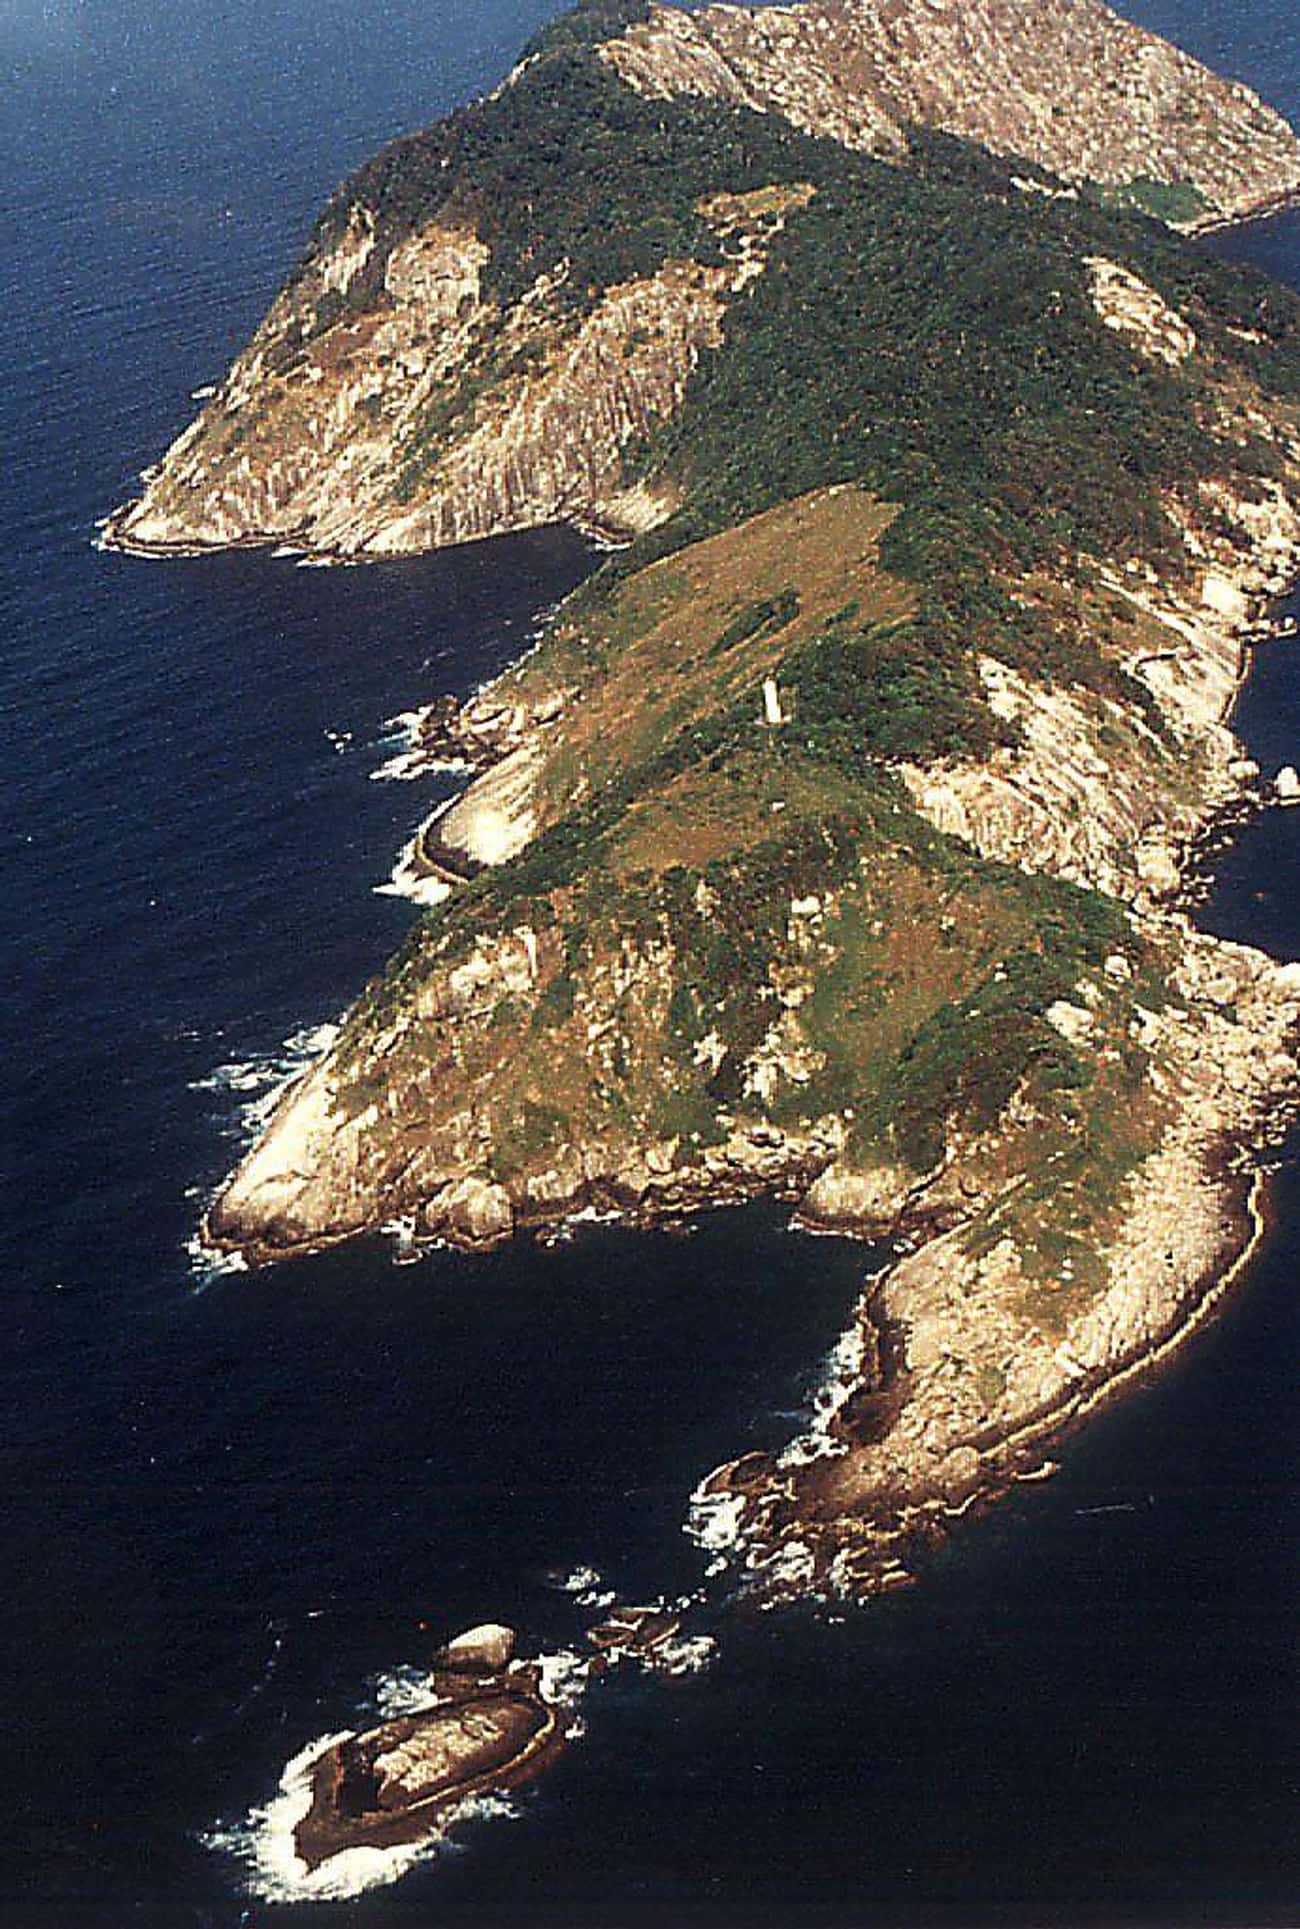 Ilha De Queimada Grande Is So Overrun With Lethal Snakes, It's Usually Just Called 'Snake Island'